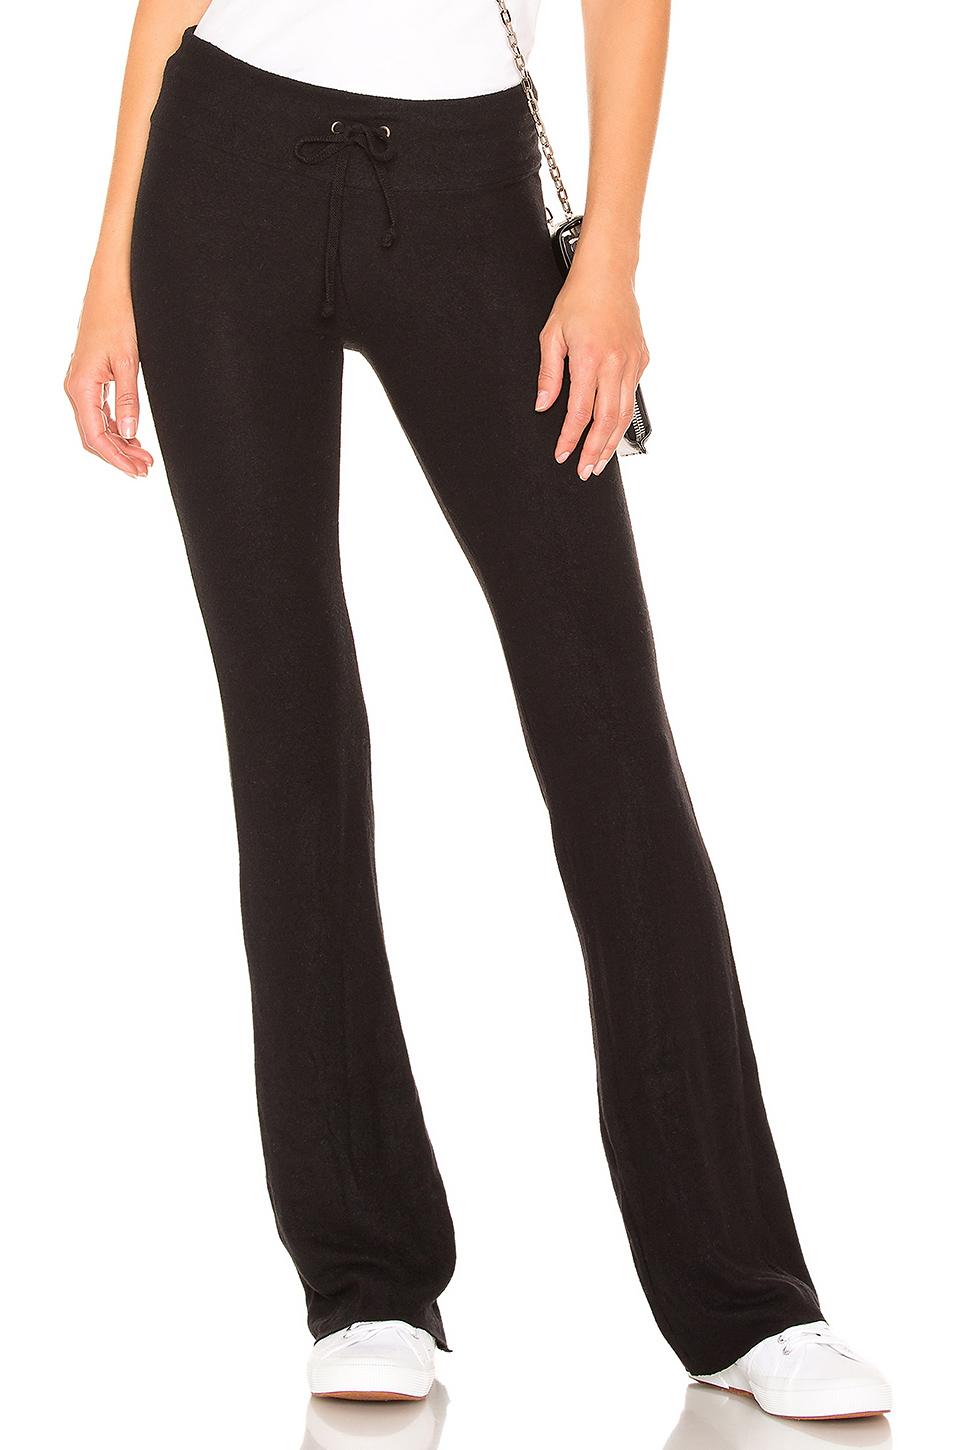 Wildfox Synthetic Tennis Club Pant in Black - Lyst